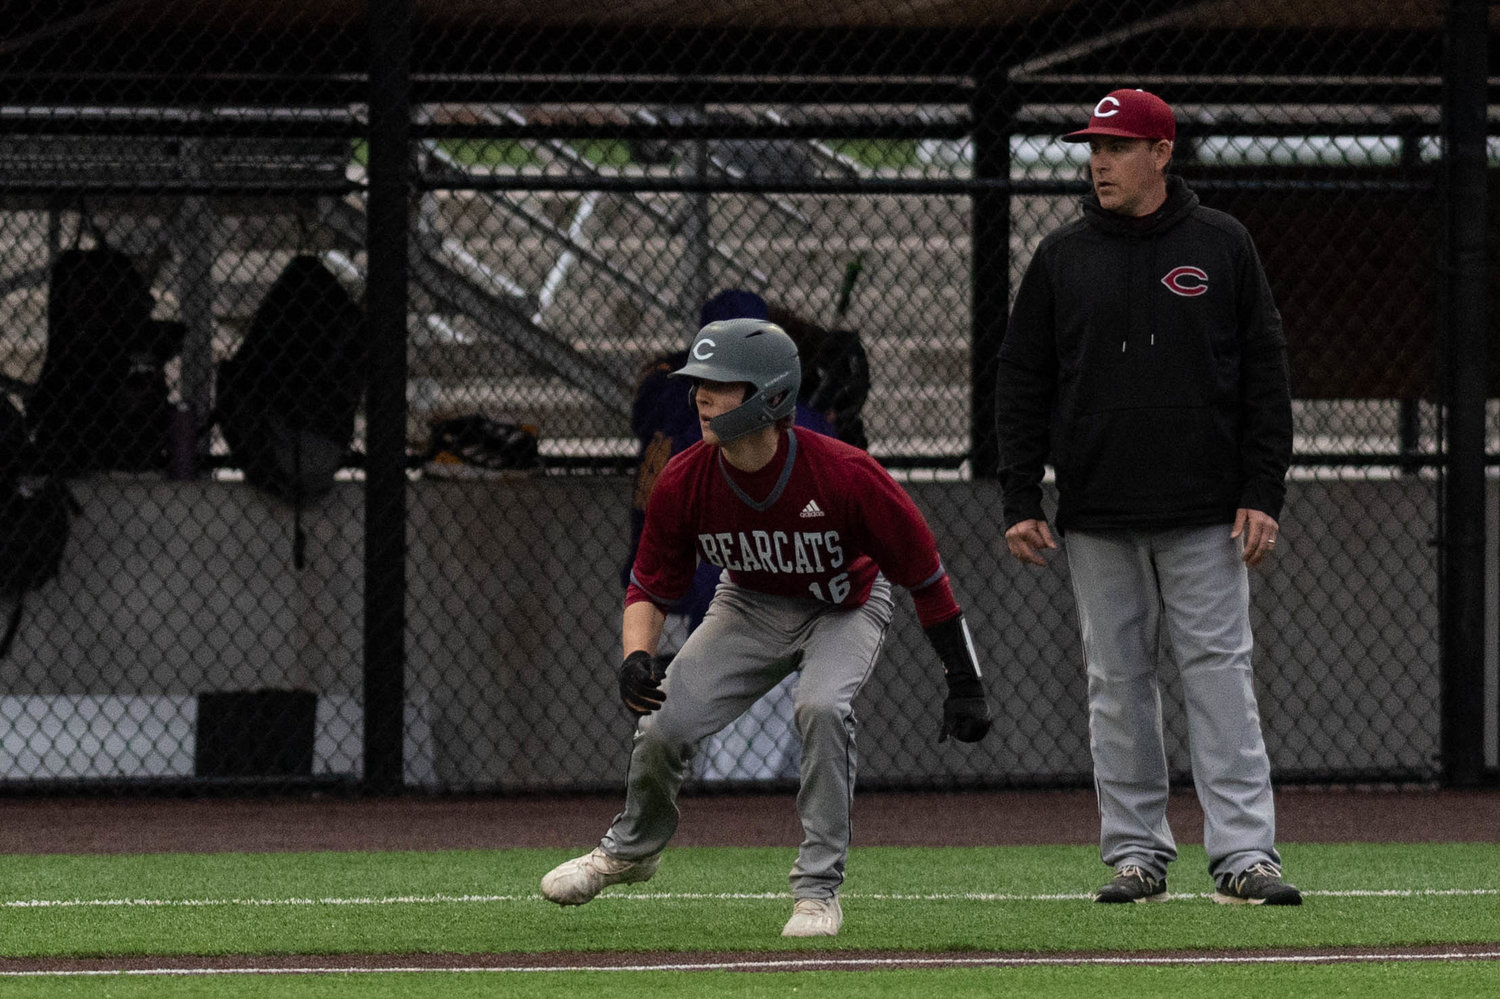 W.F. West's Deacon Meller navigates the bases as coach Bryan Bullock looks on against Columbia River in the 2A District 4 semifinals May 11 at Ridgefield.